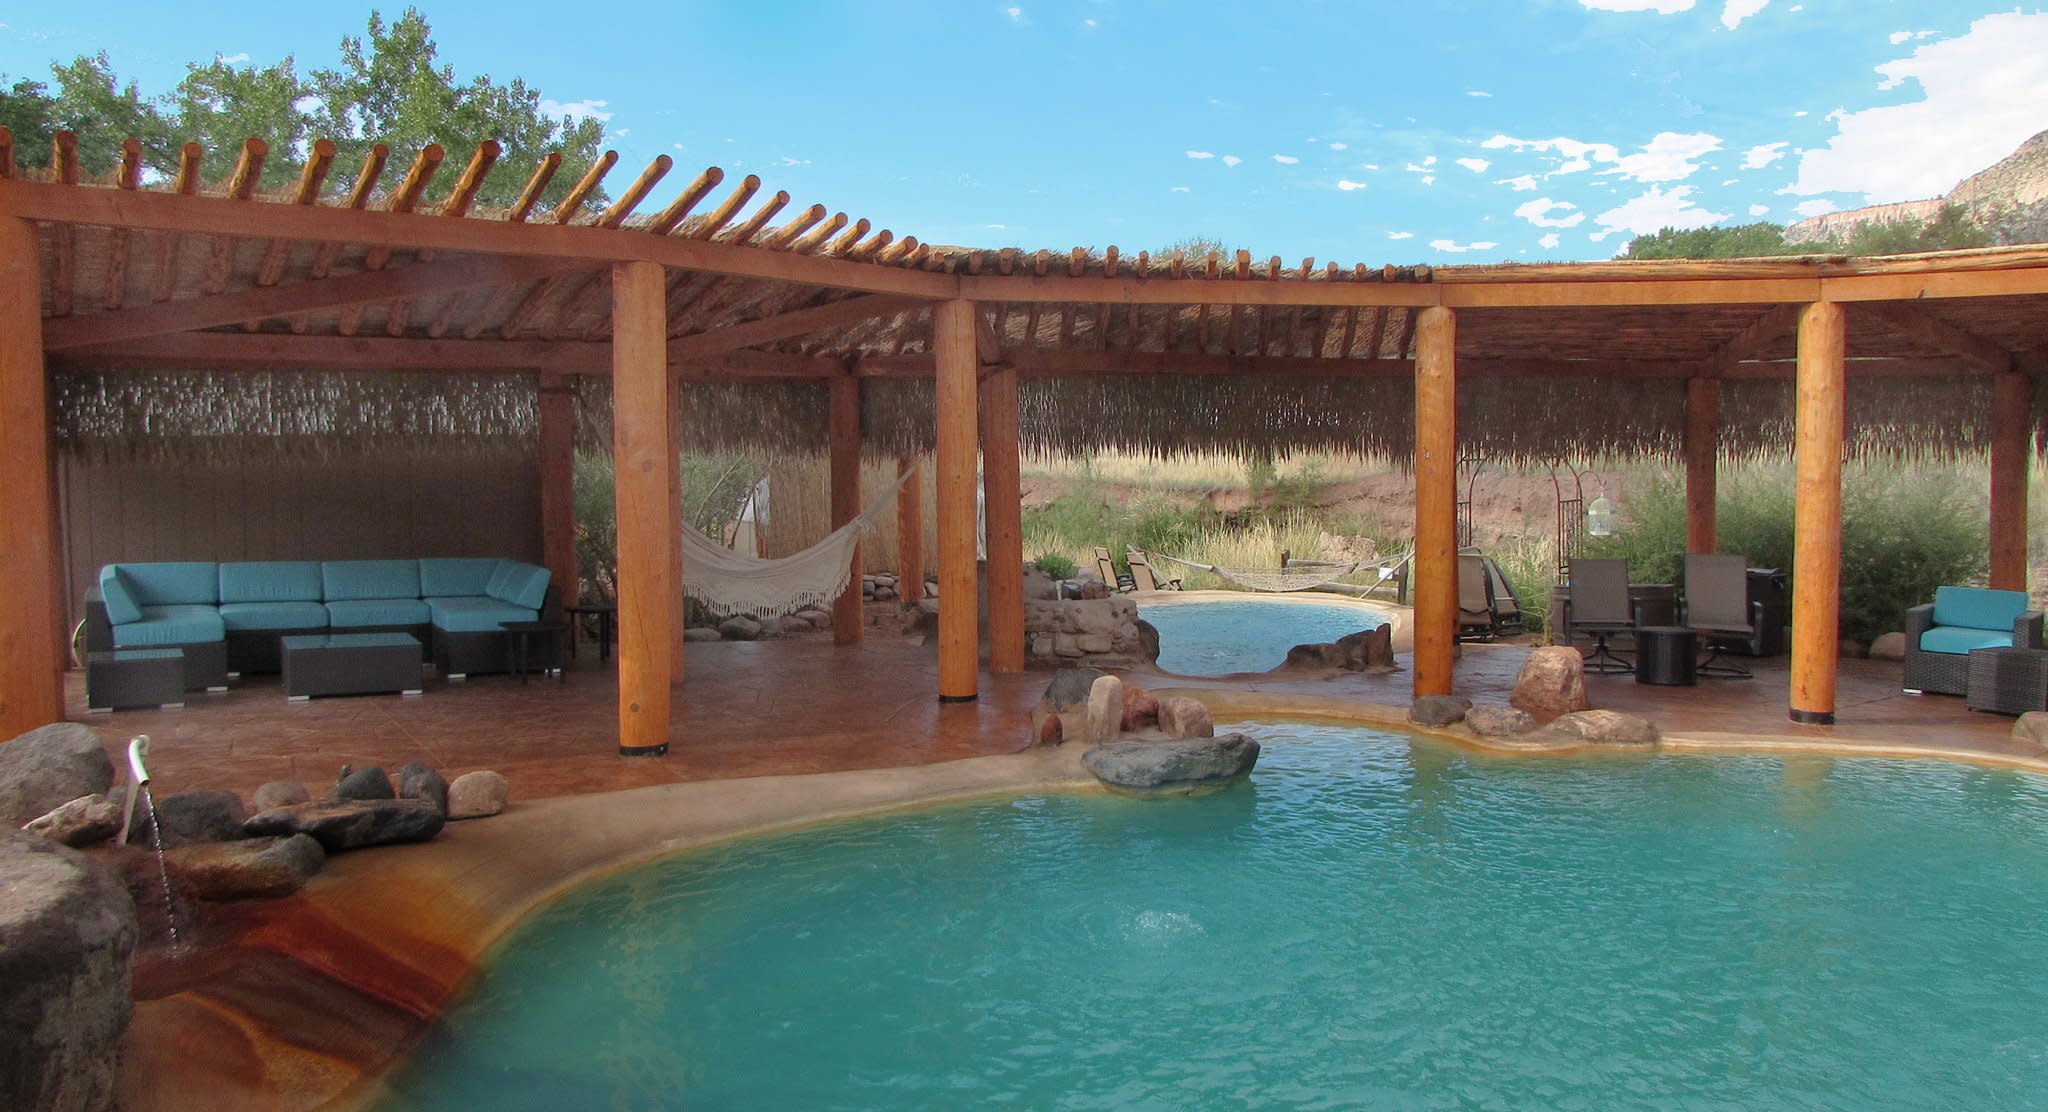 5 Must-Visit Hot Springs and Spas in the Albuquerque Area